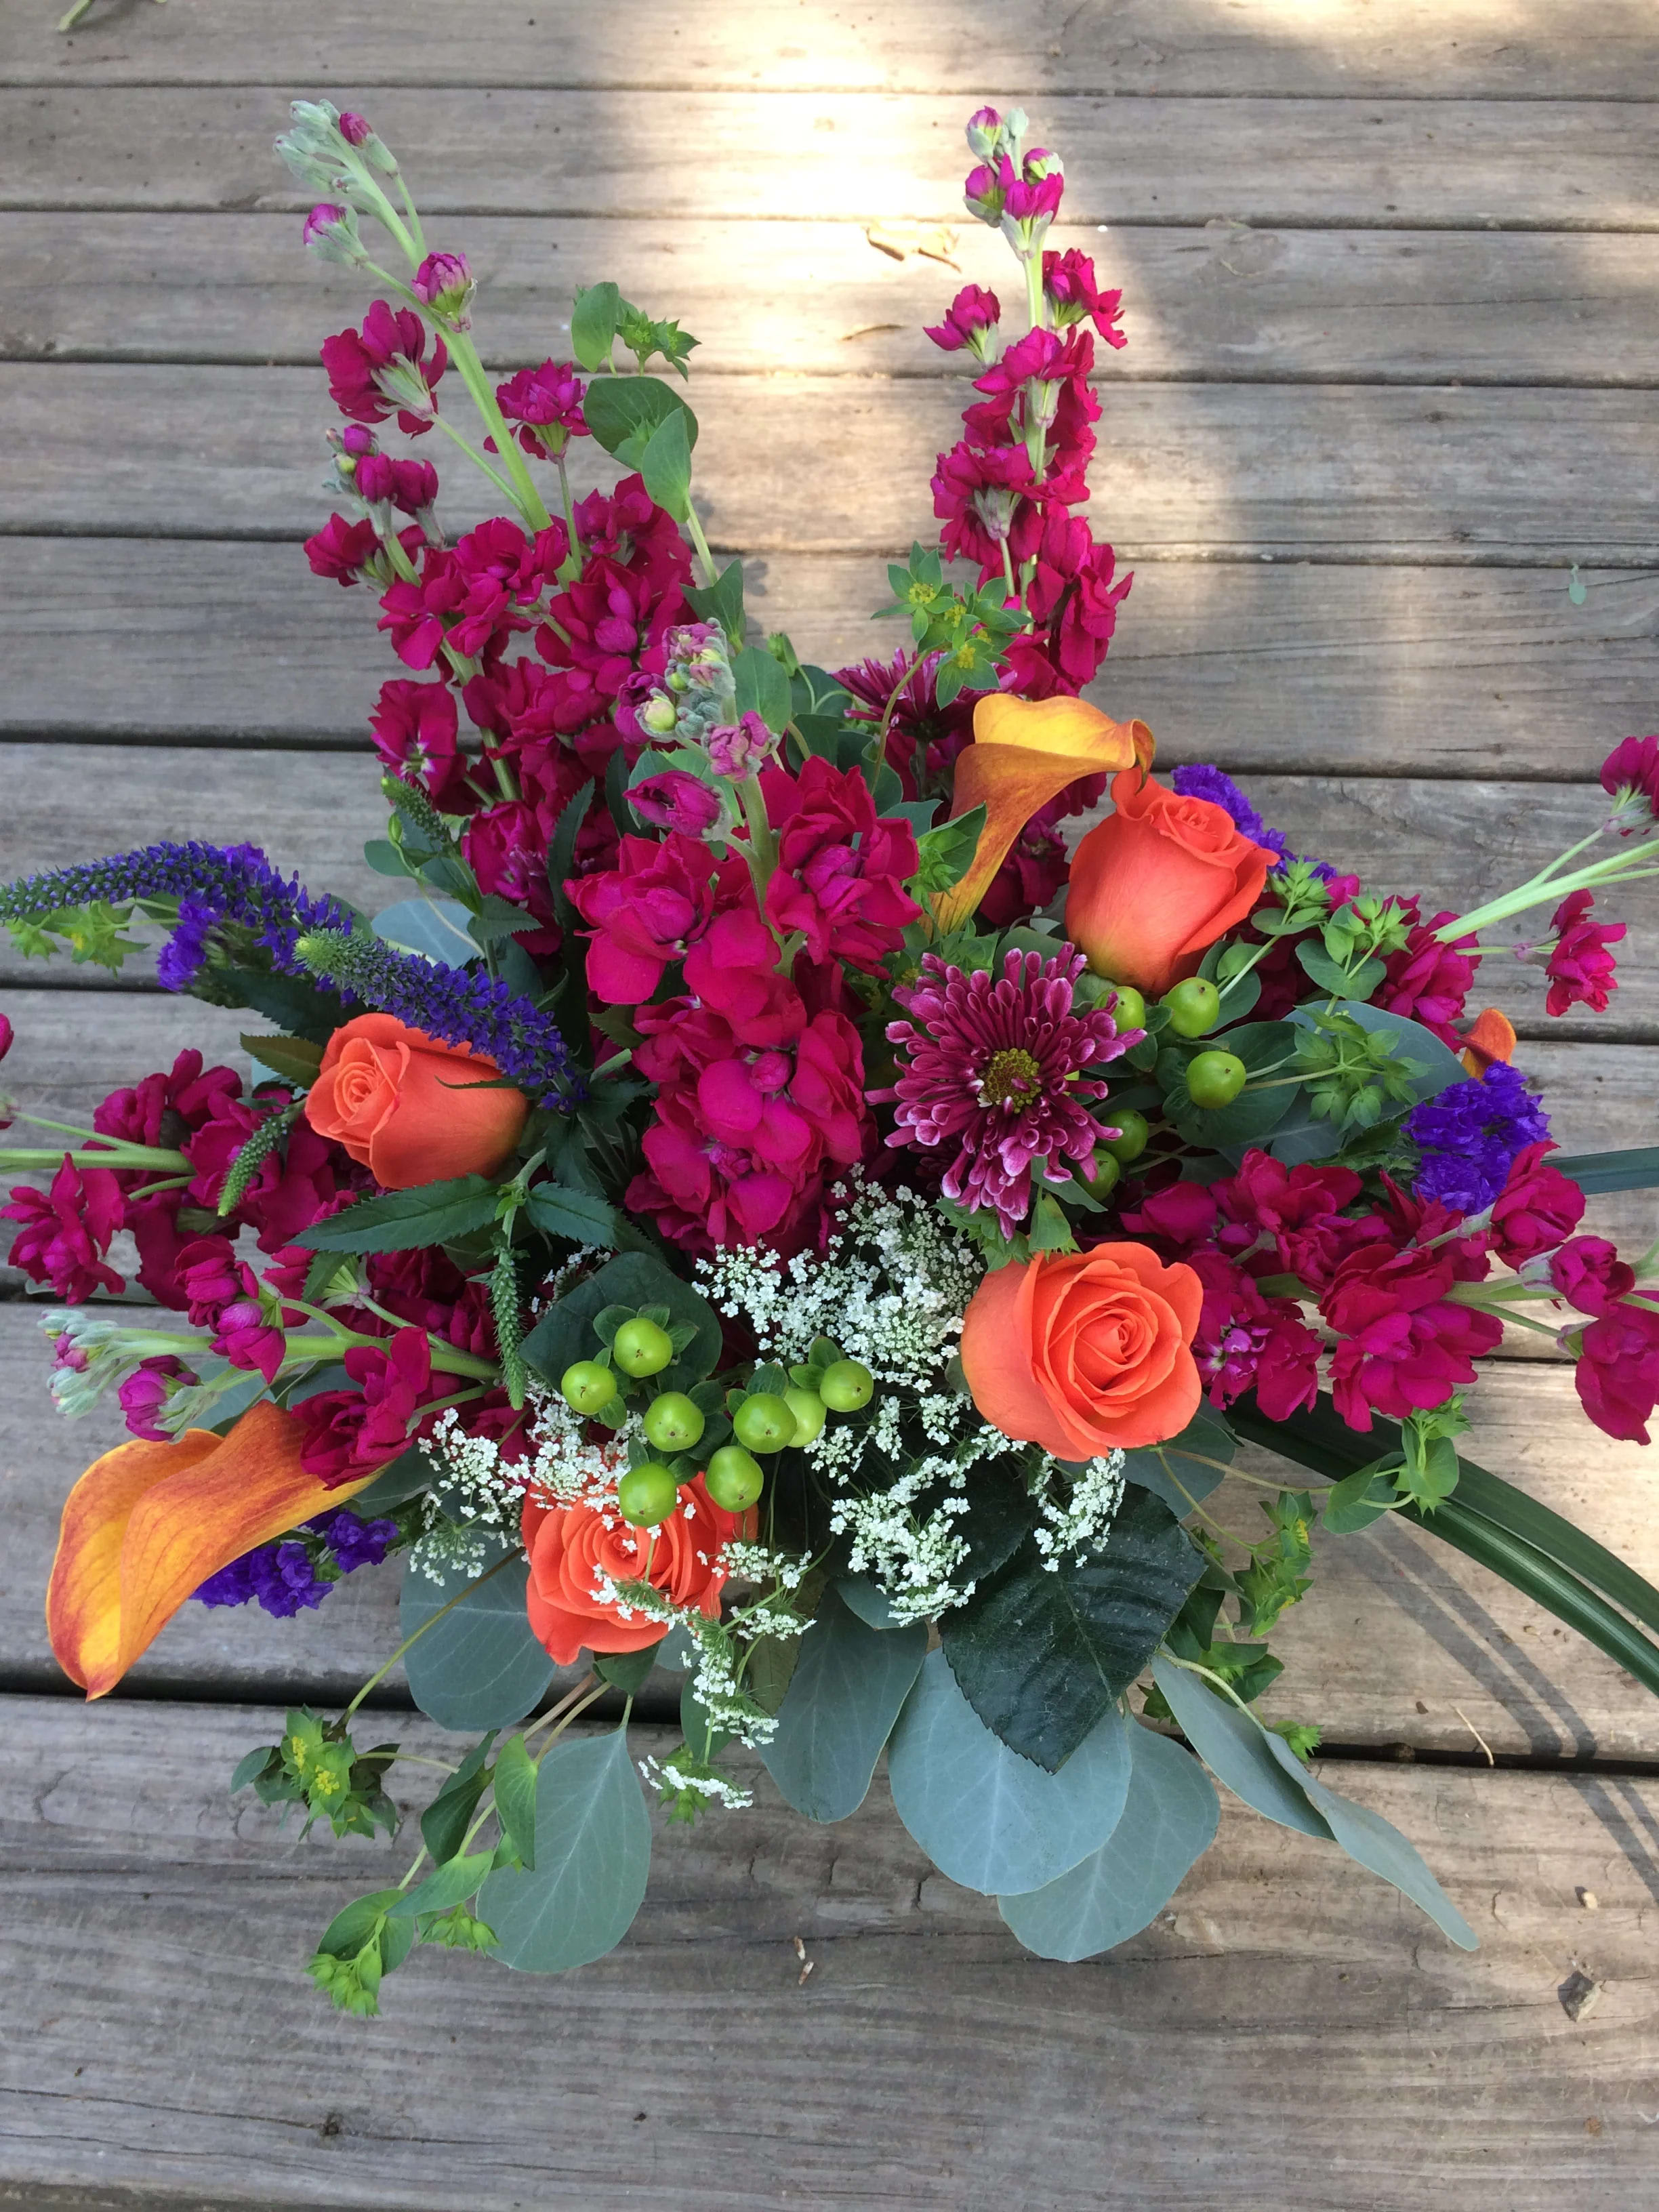 Breezy Blooms - A bright colorful bouquet in a square cube vase with purple stock, mango mini calla lilies, and orange roses are the highlight of this bouquet. This late summer/fall bouquet is a top seller for birthdays, anniversaries or just because. Picasso Floral Design Studio will hand deliver.